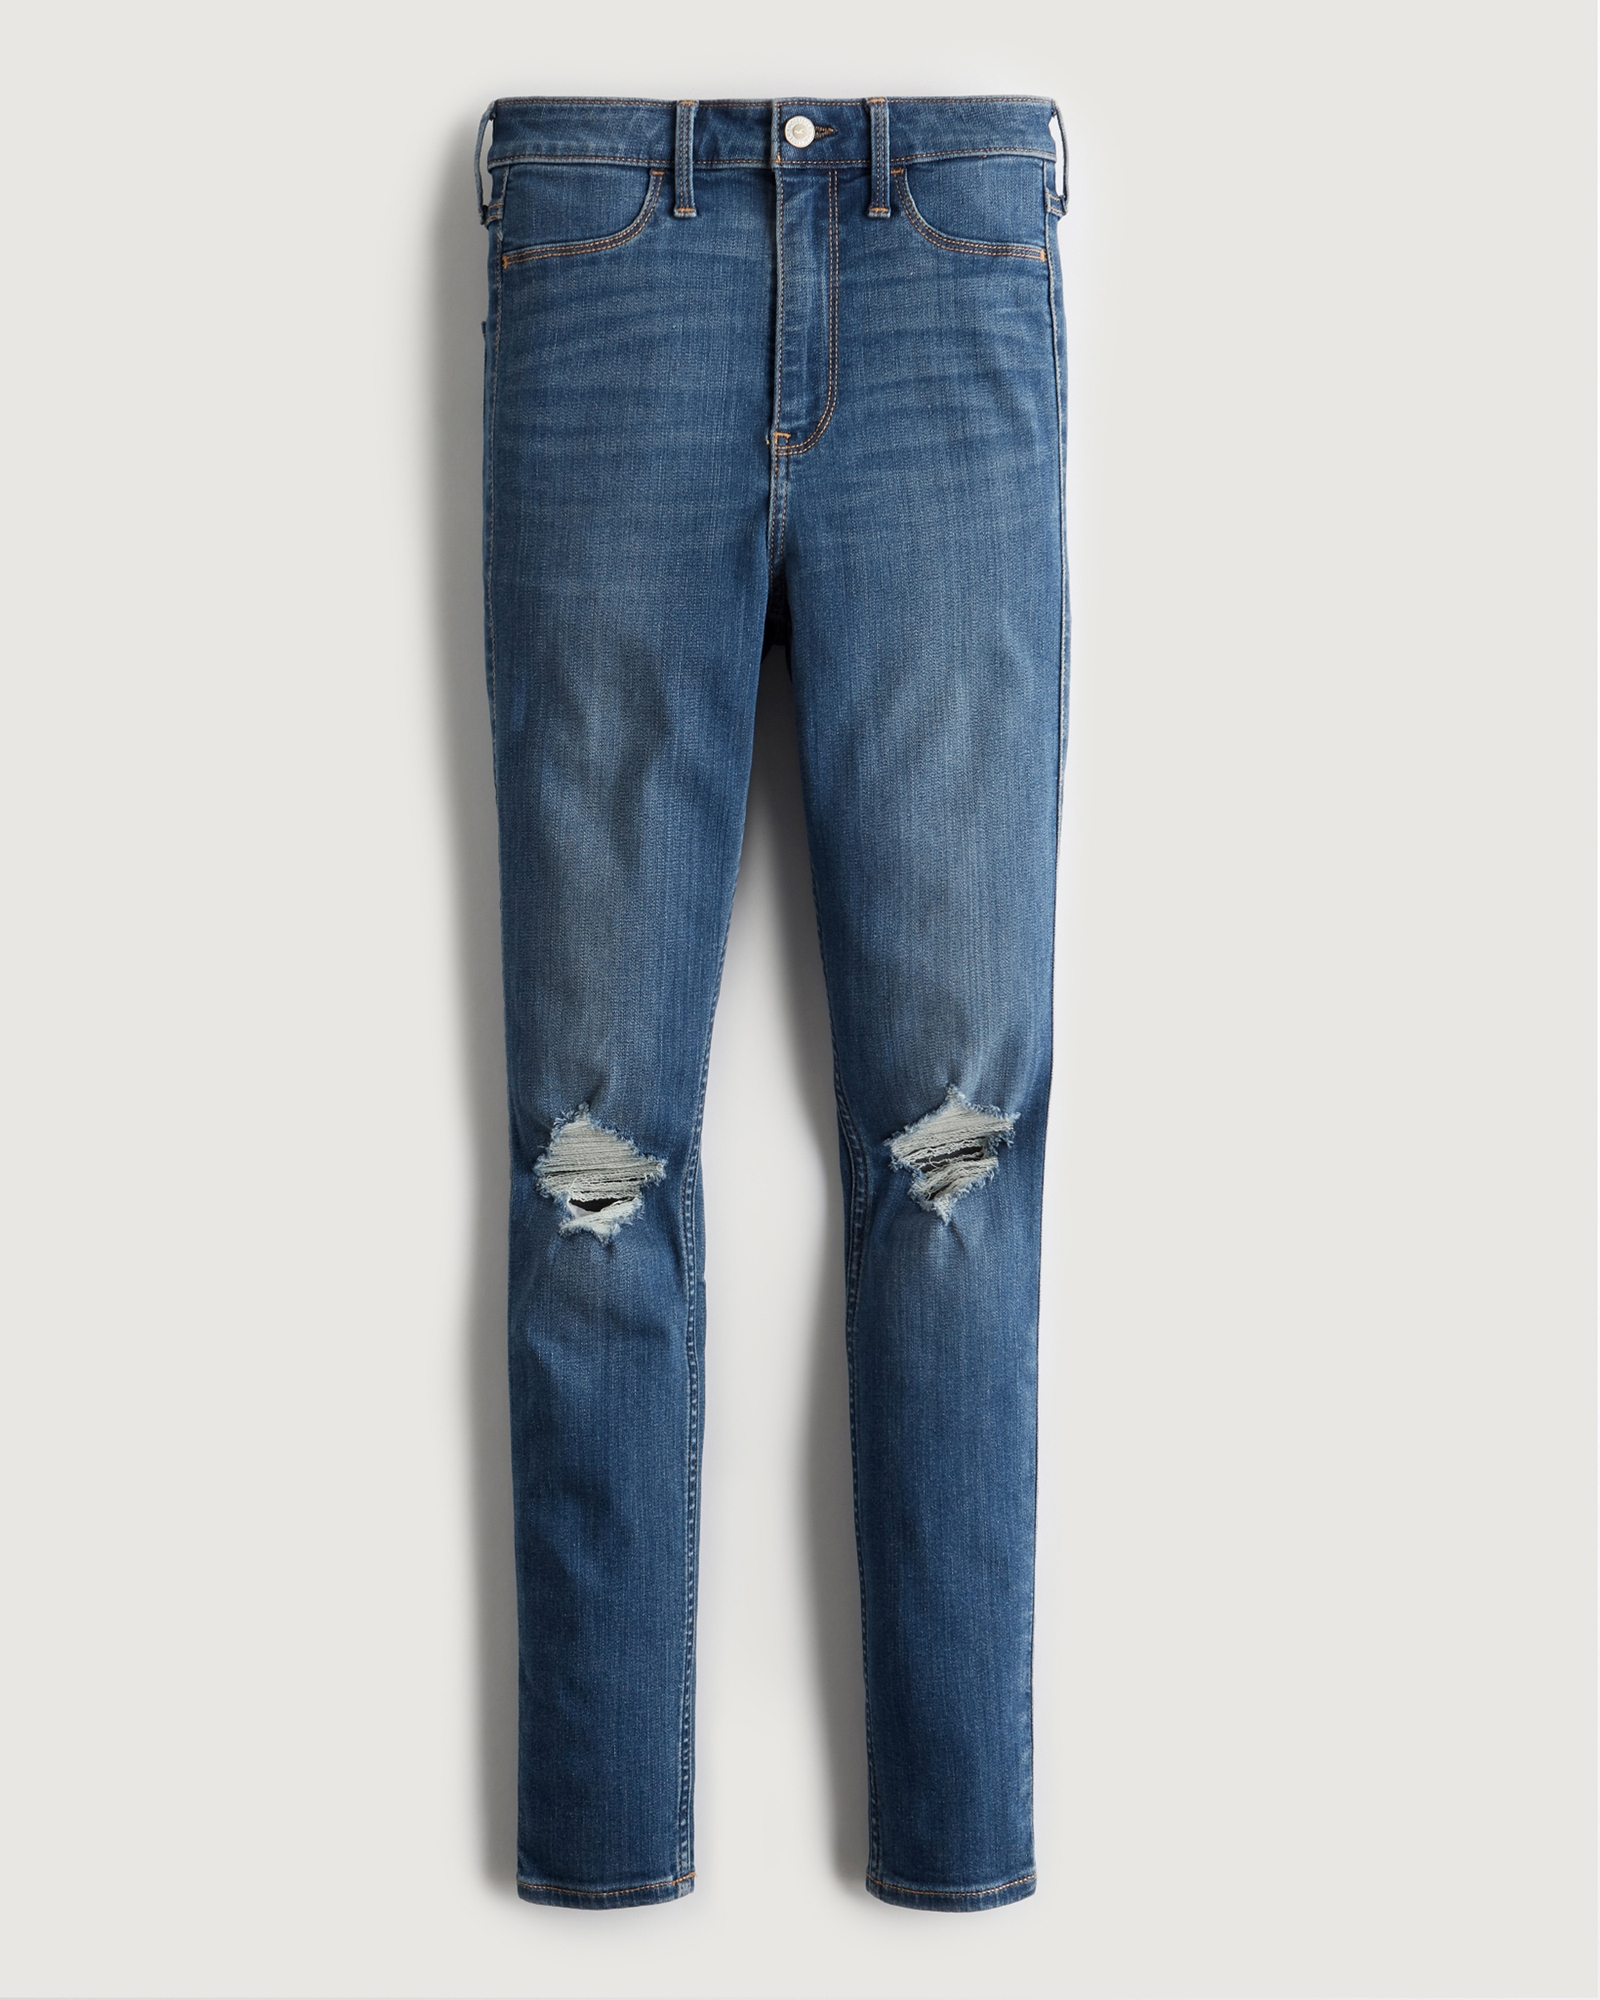 https://img.hollisterco.com/is/image/anf/KIC_355-1179-0663-279_prod1.jpg?policy=product-extra-large